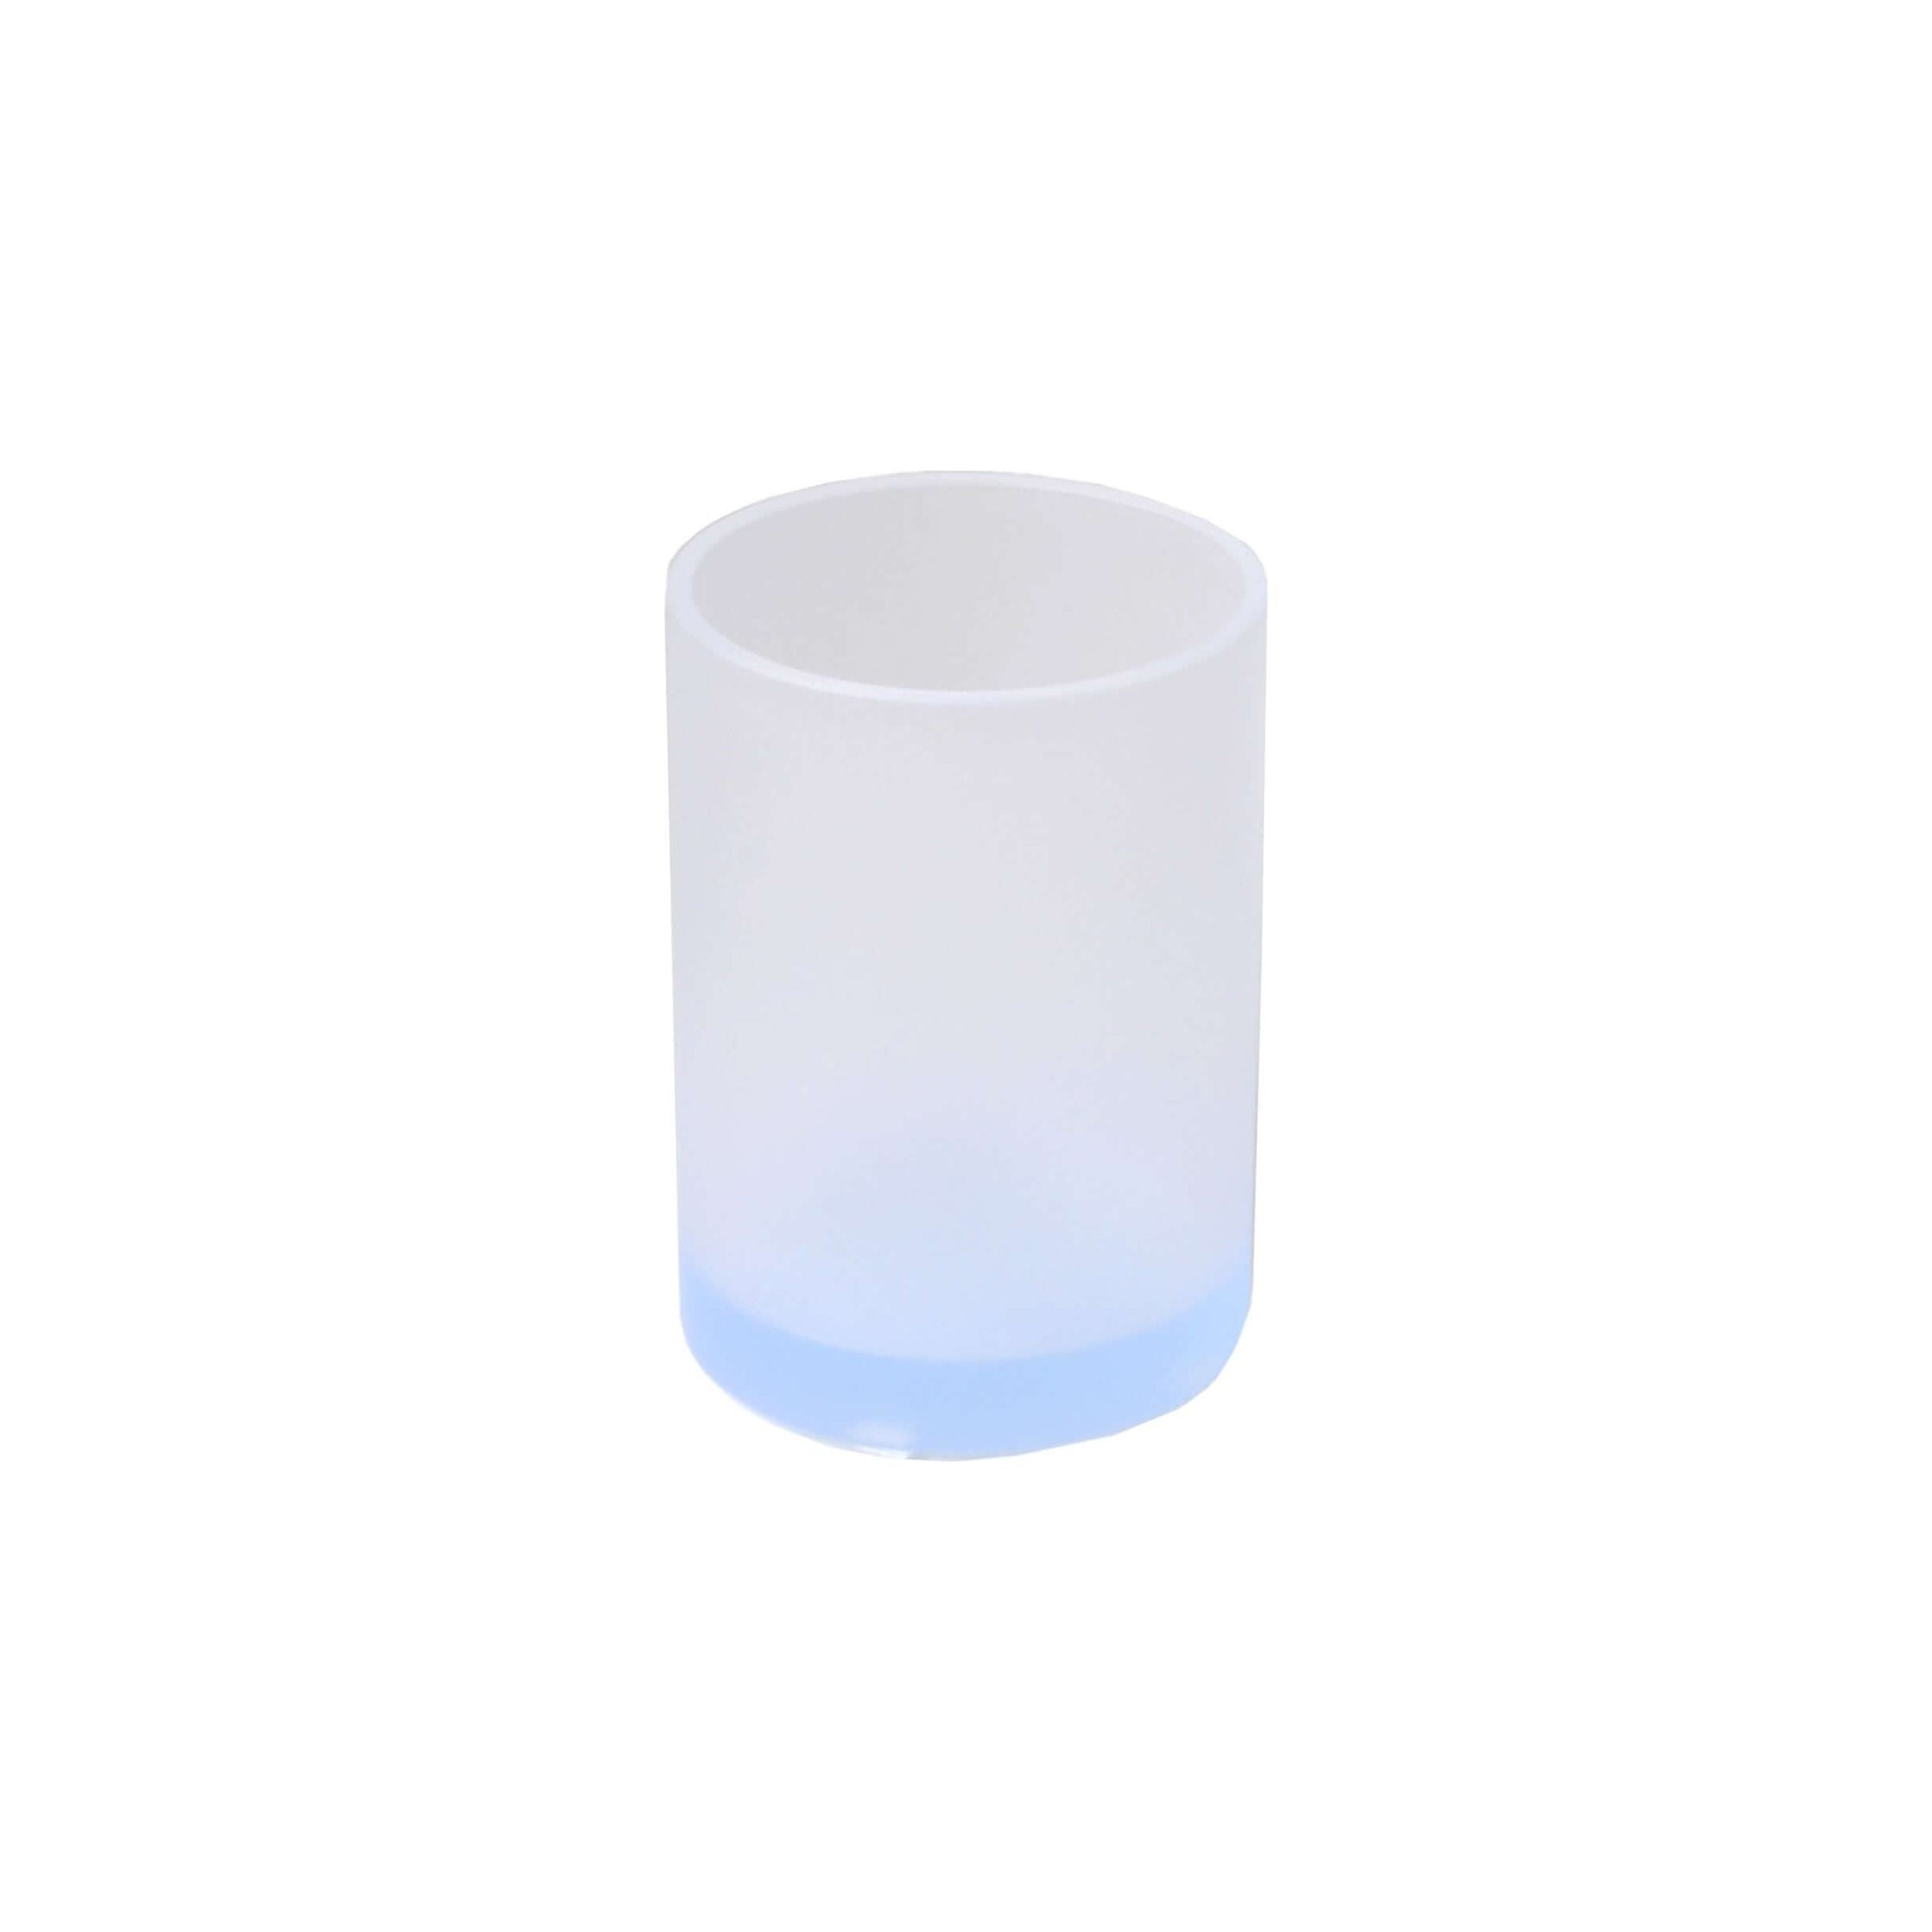 Mike + Ally - ICE Frosted Sky Tumbler - 31471 - Blue - 